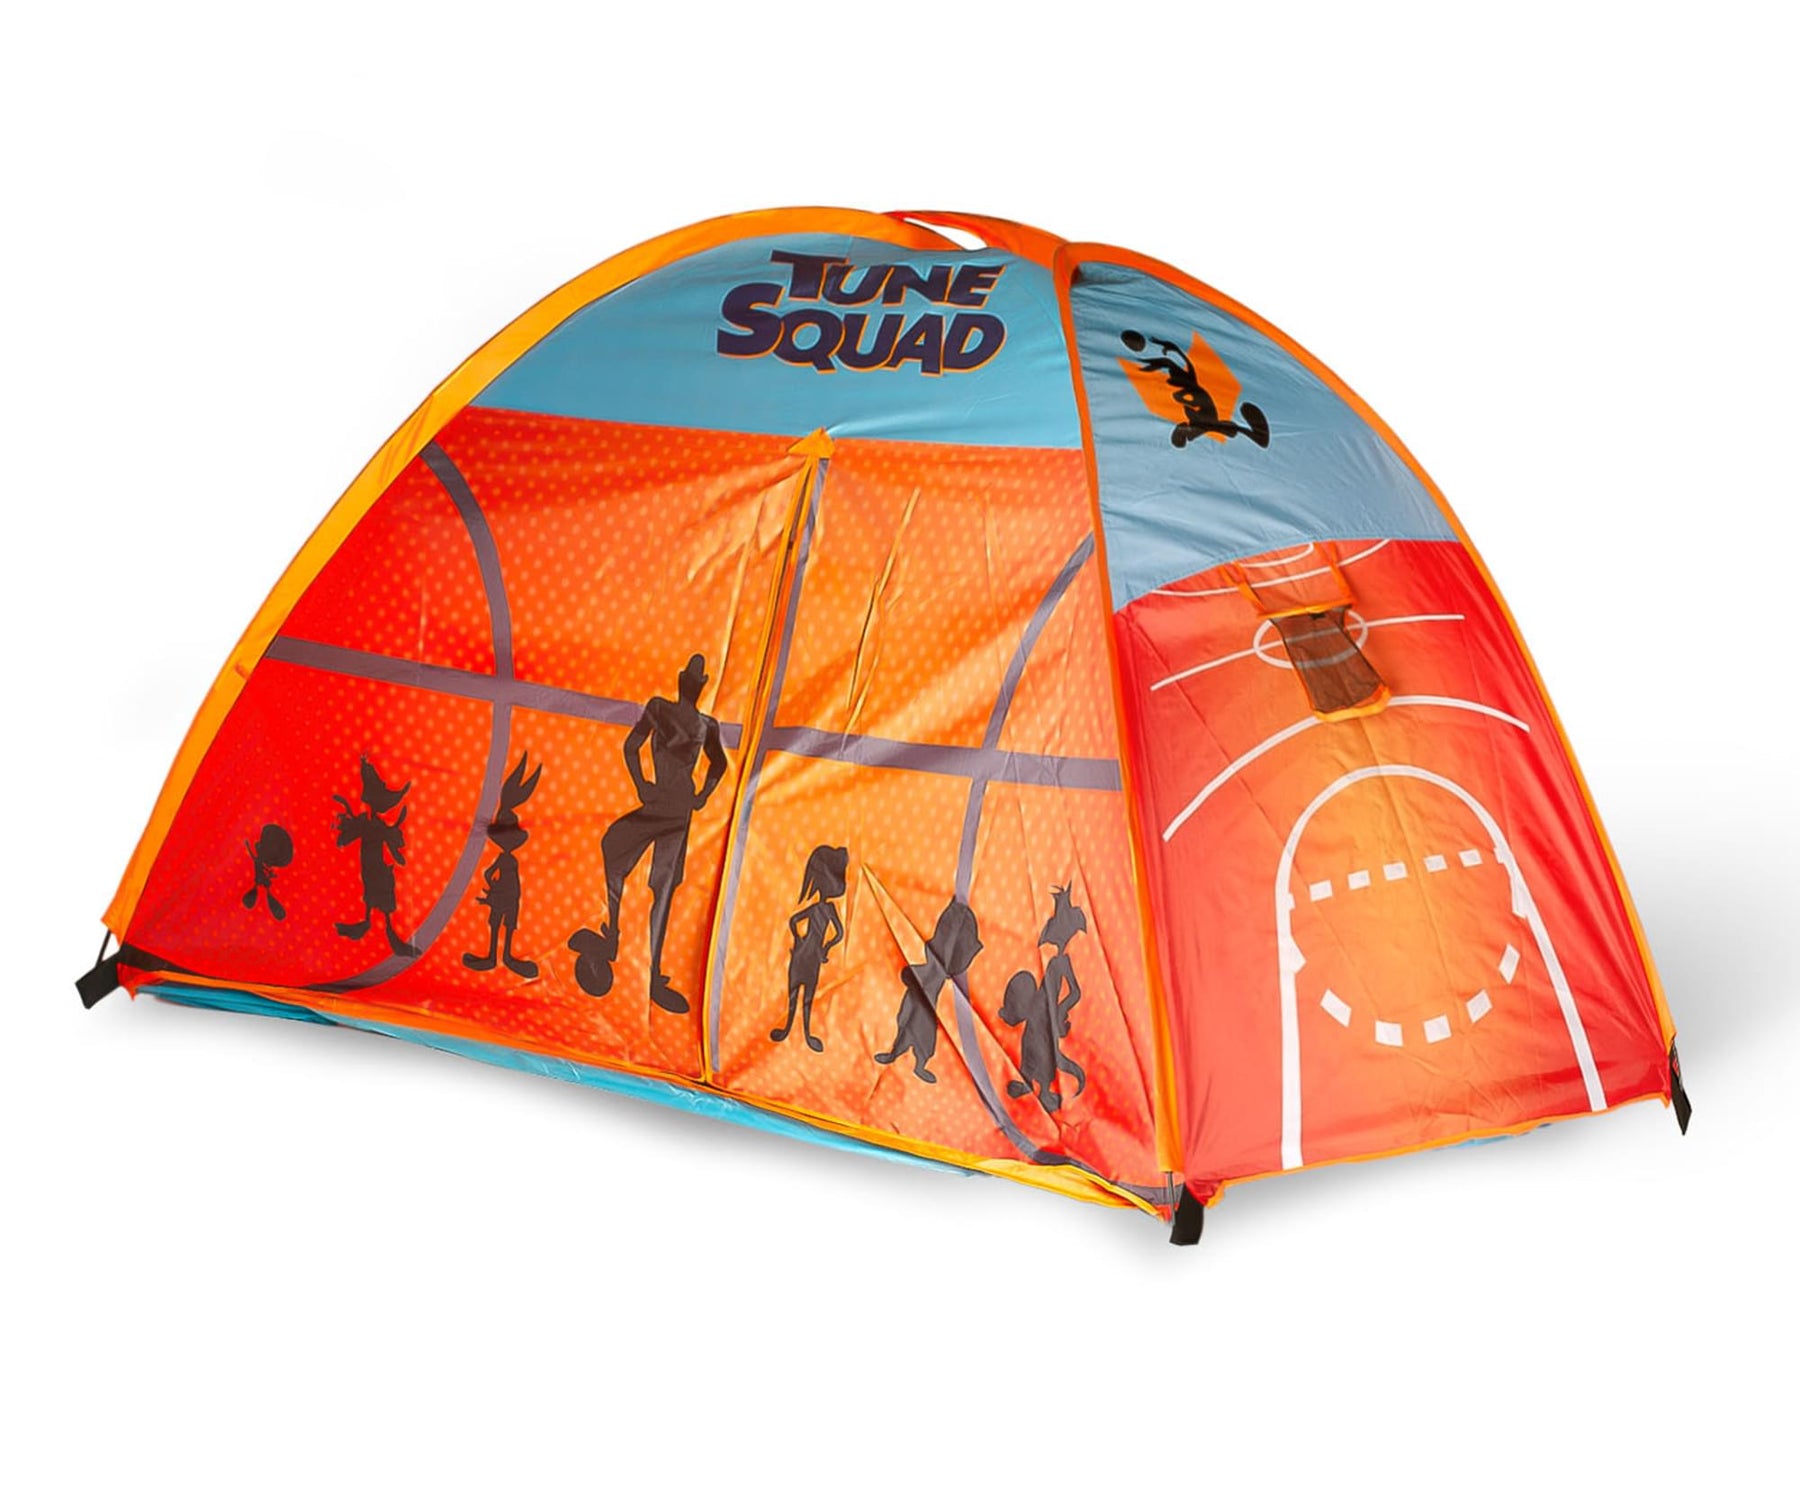 Space Jam: A New Legacy Tune Squad Indoor Bed Tent Pop-Up Canopy